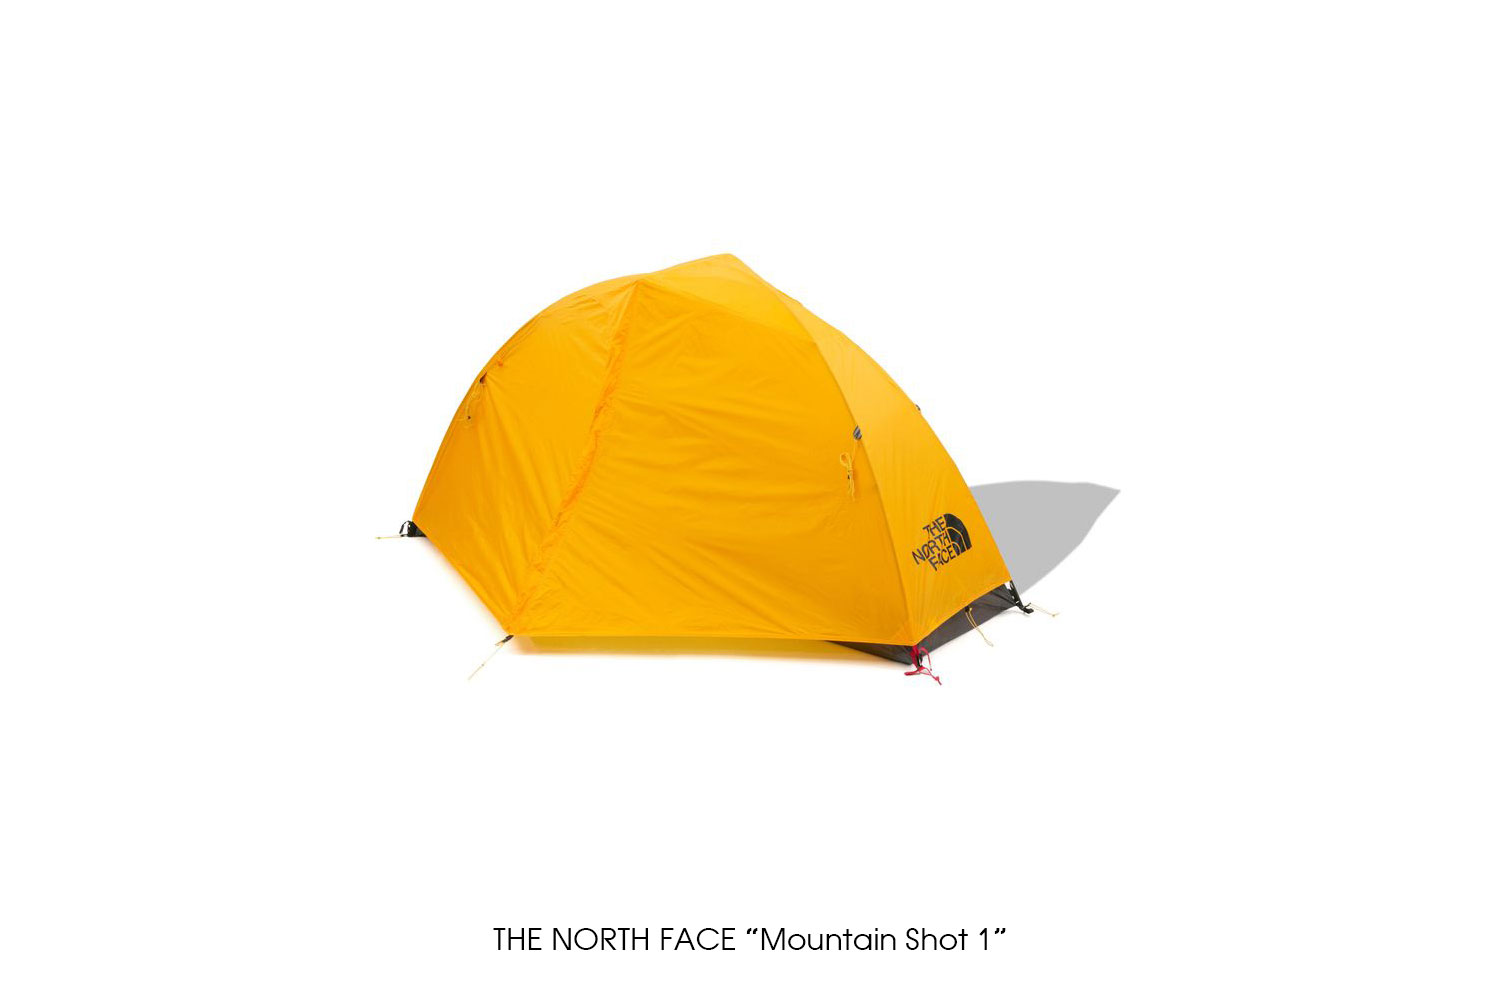 THE NORTH FACE "Mountain Shot 1"